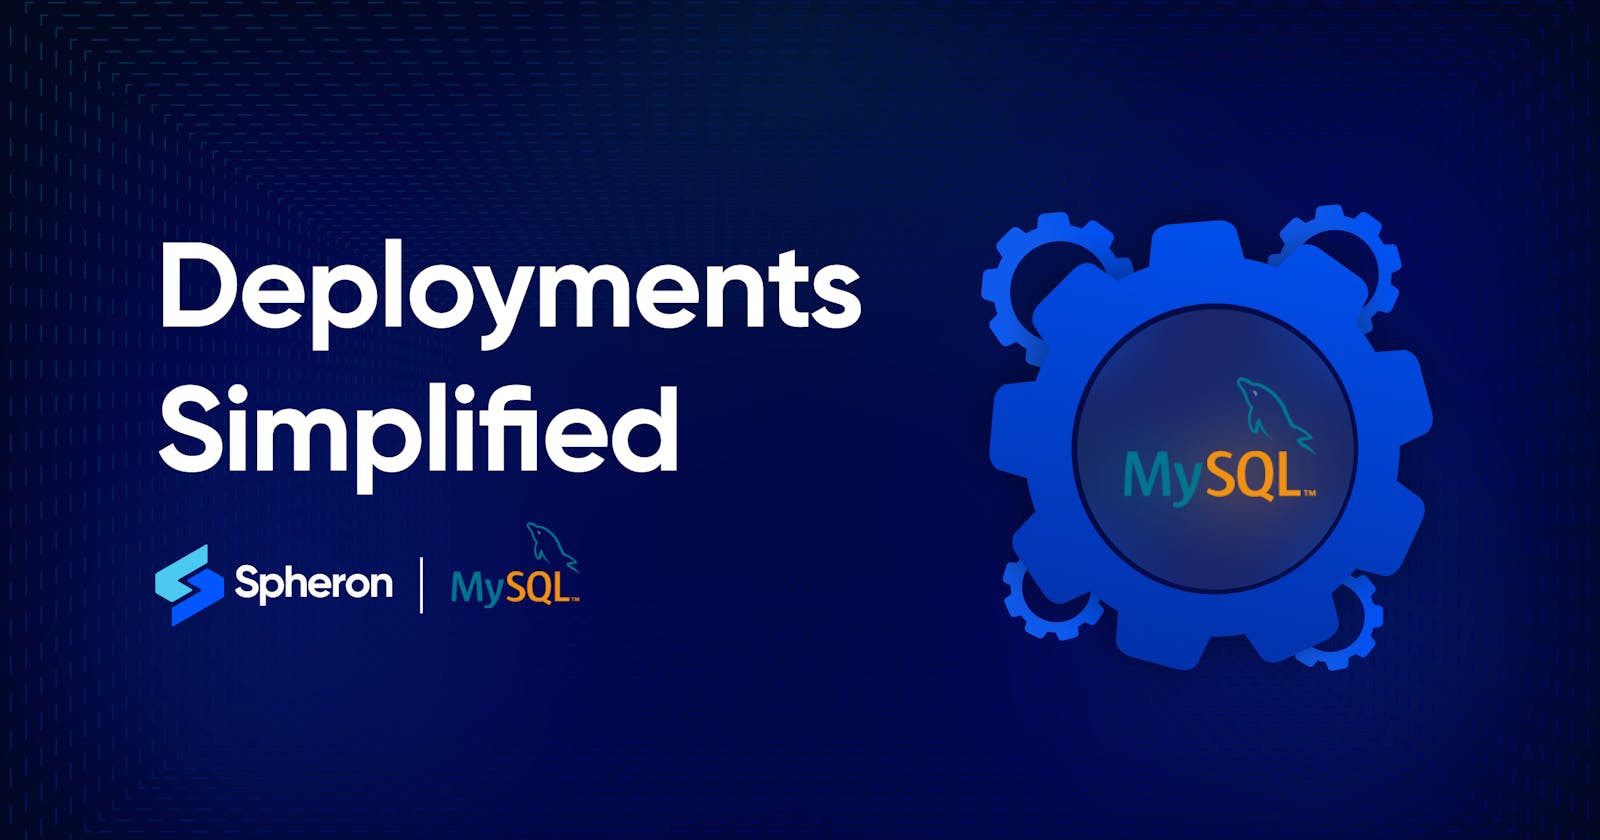 Deploy a MySQL database in a Minute using Spheron Compute